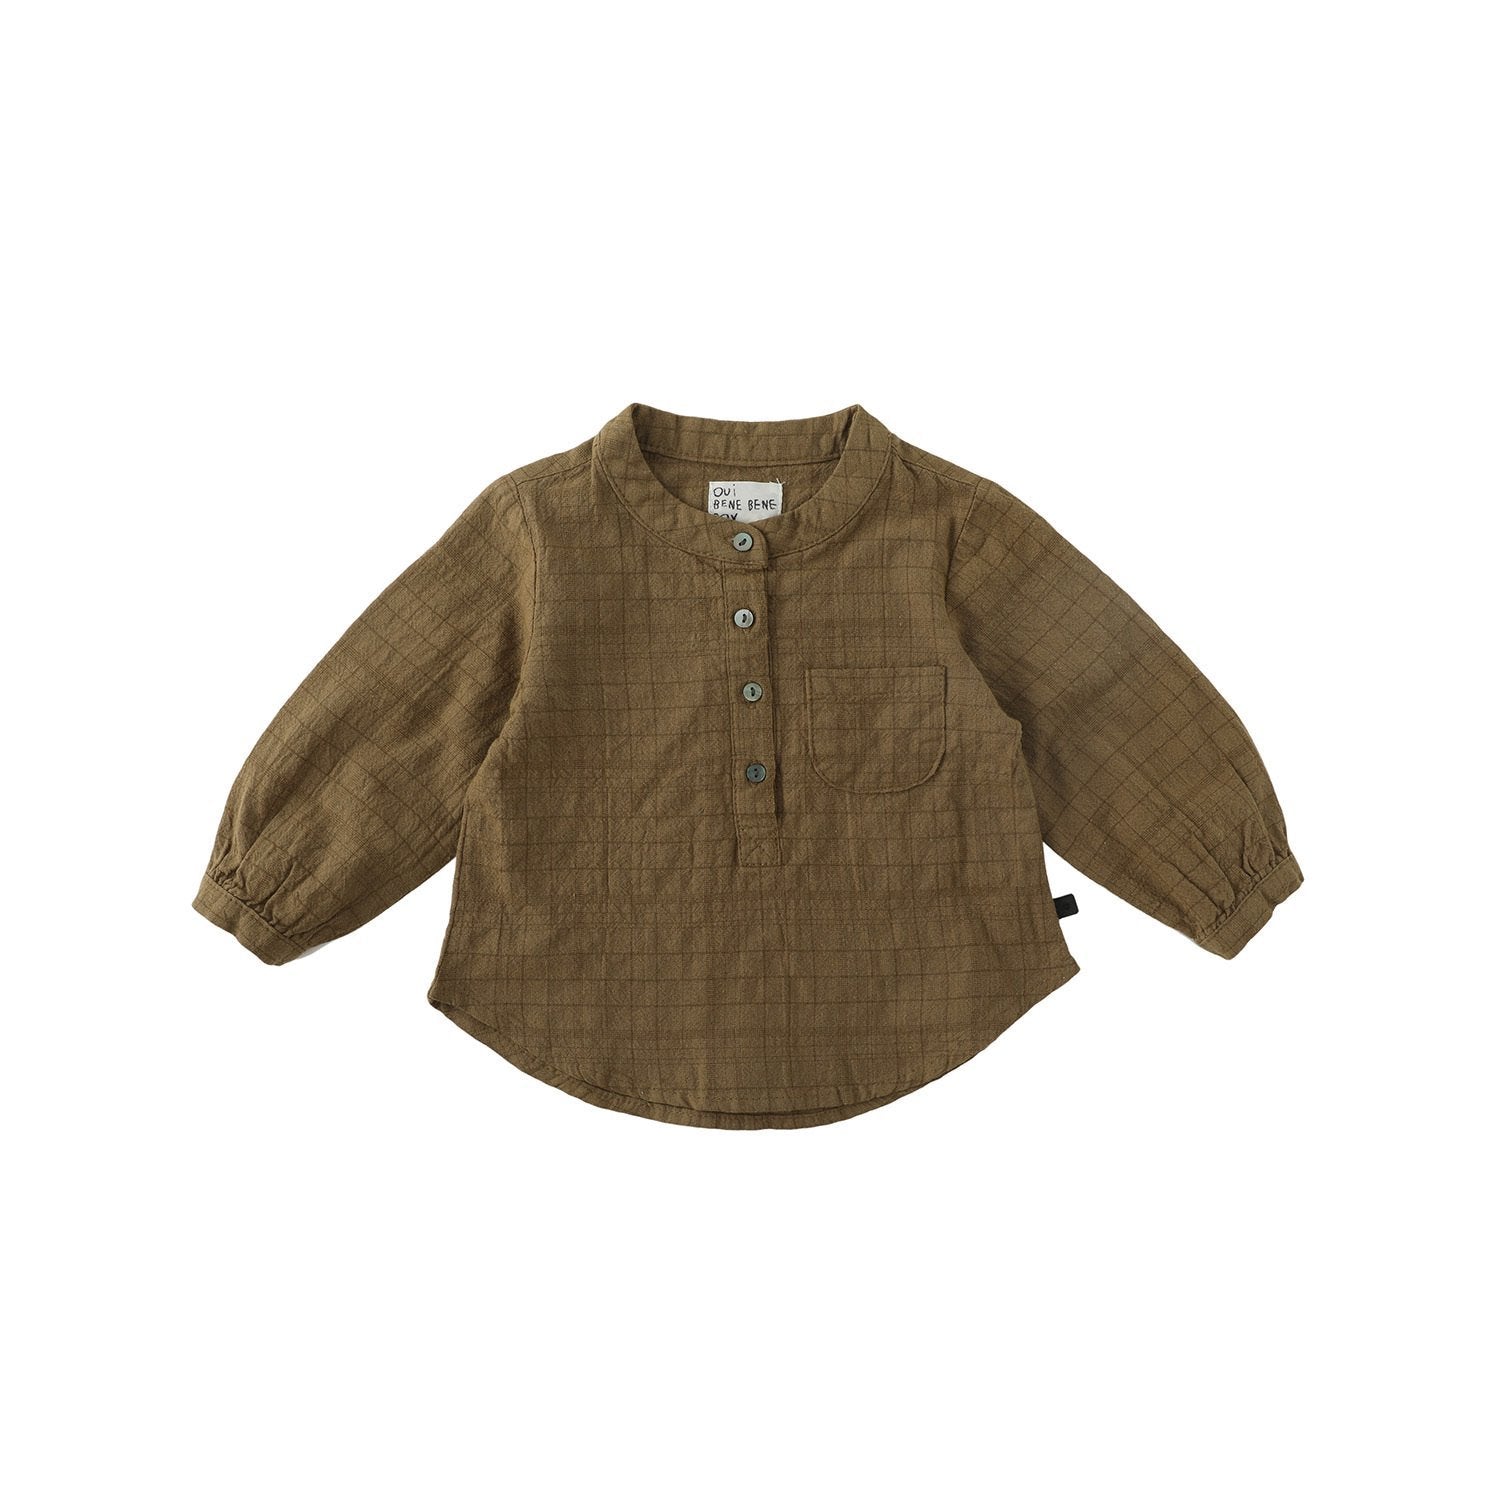 Grow Check Hemd - Khaki find Stylish Fashion for Little People- at Little Foxx Concept Store